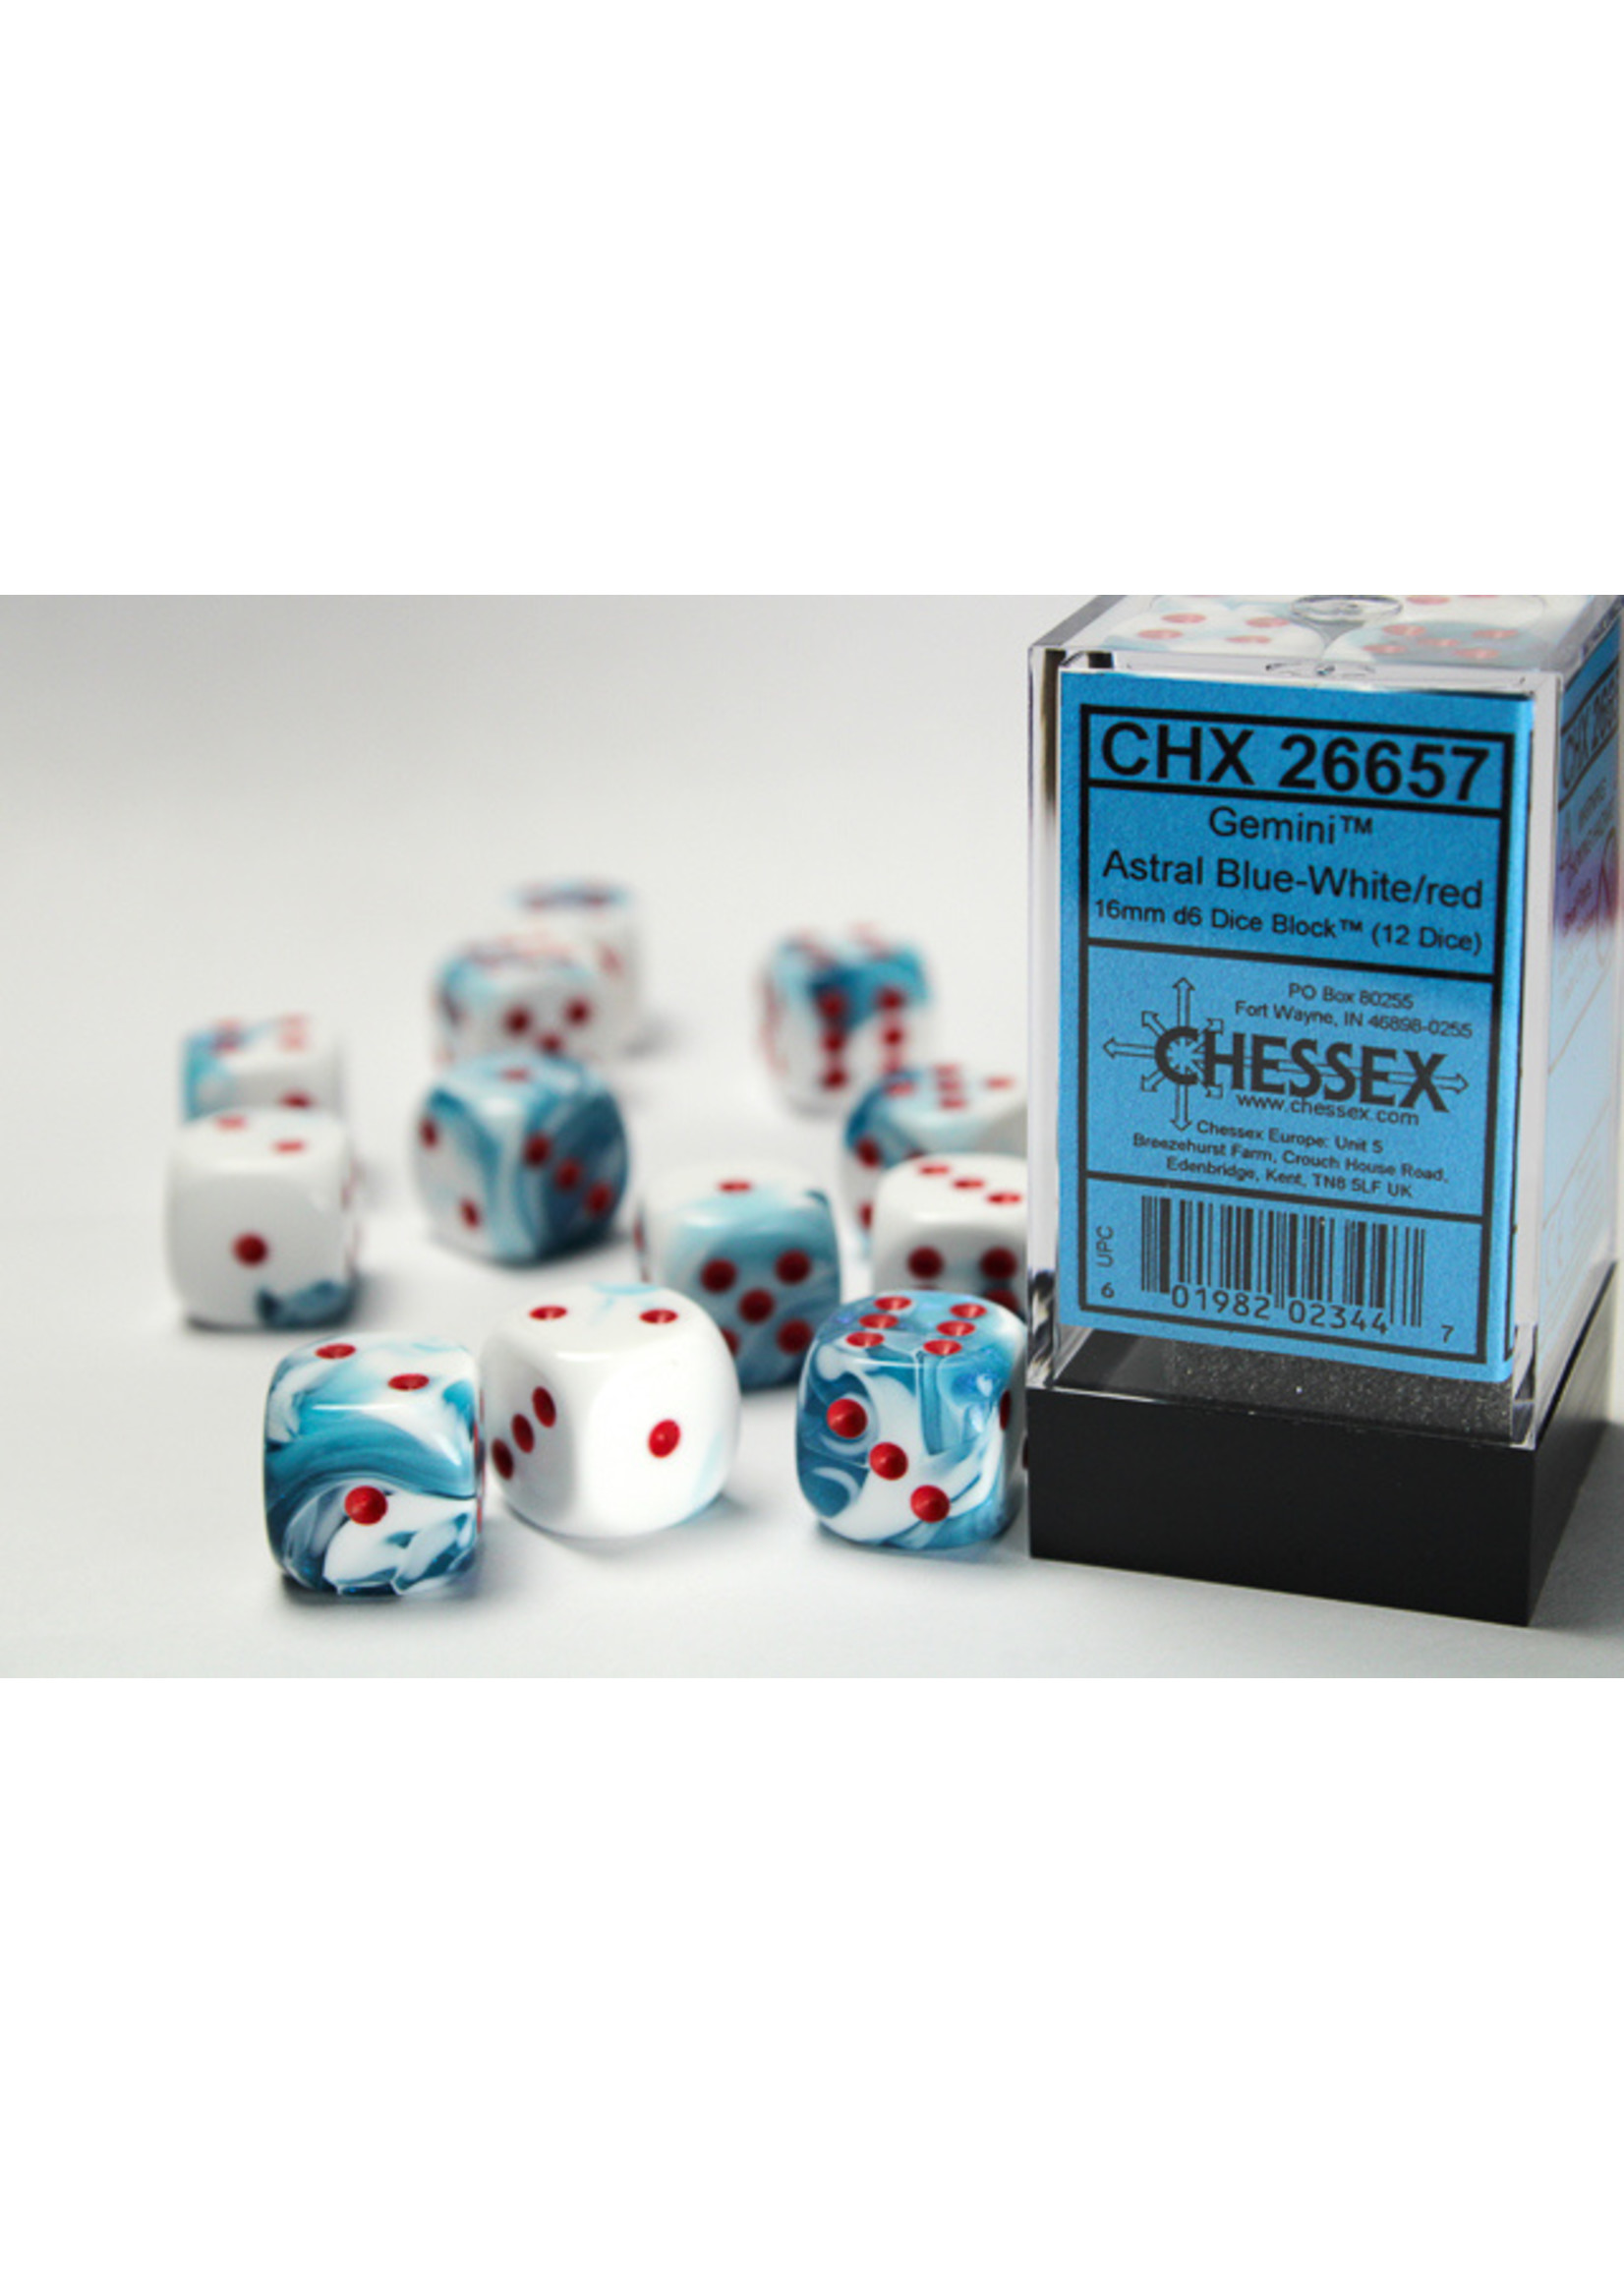 Chessex GMNI 12d6 astral blue-white/red